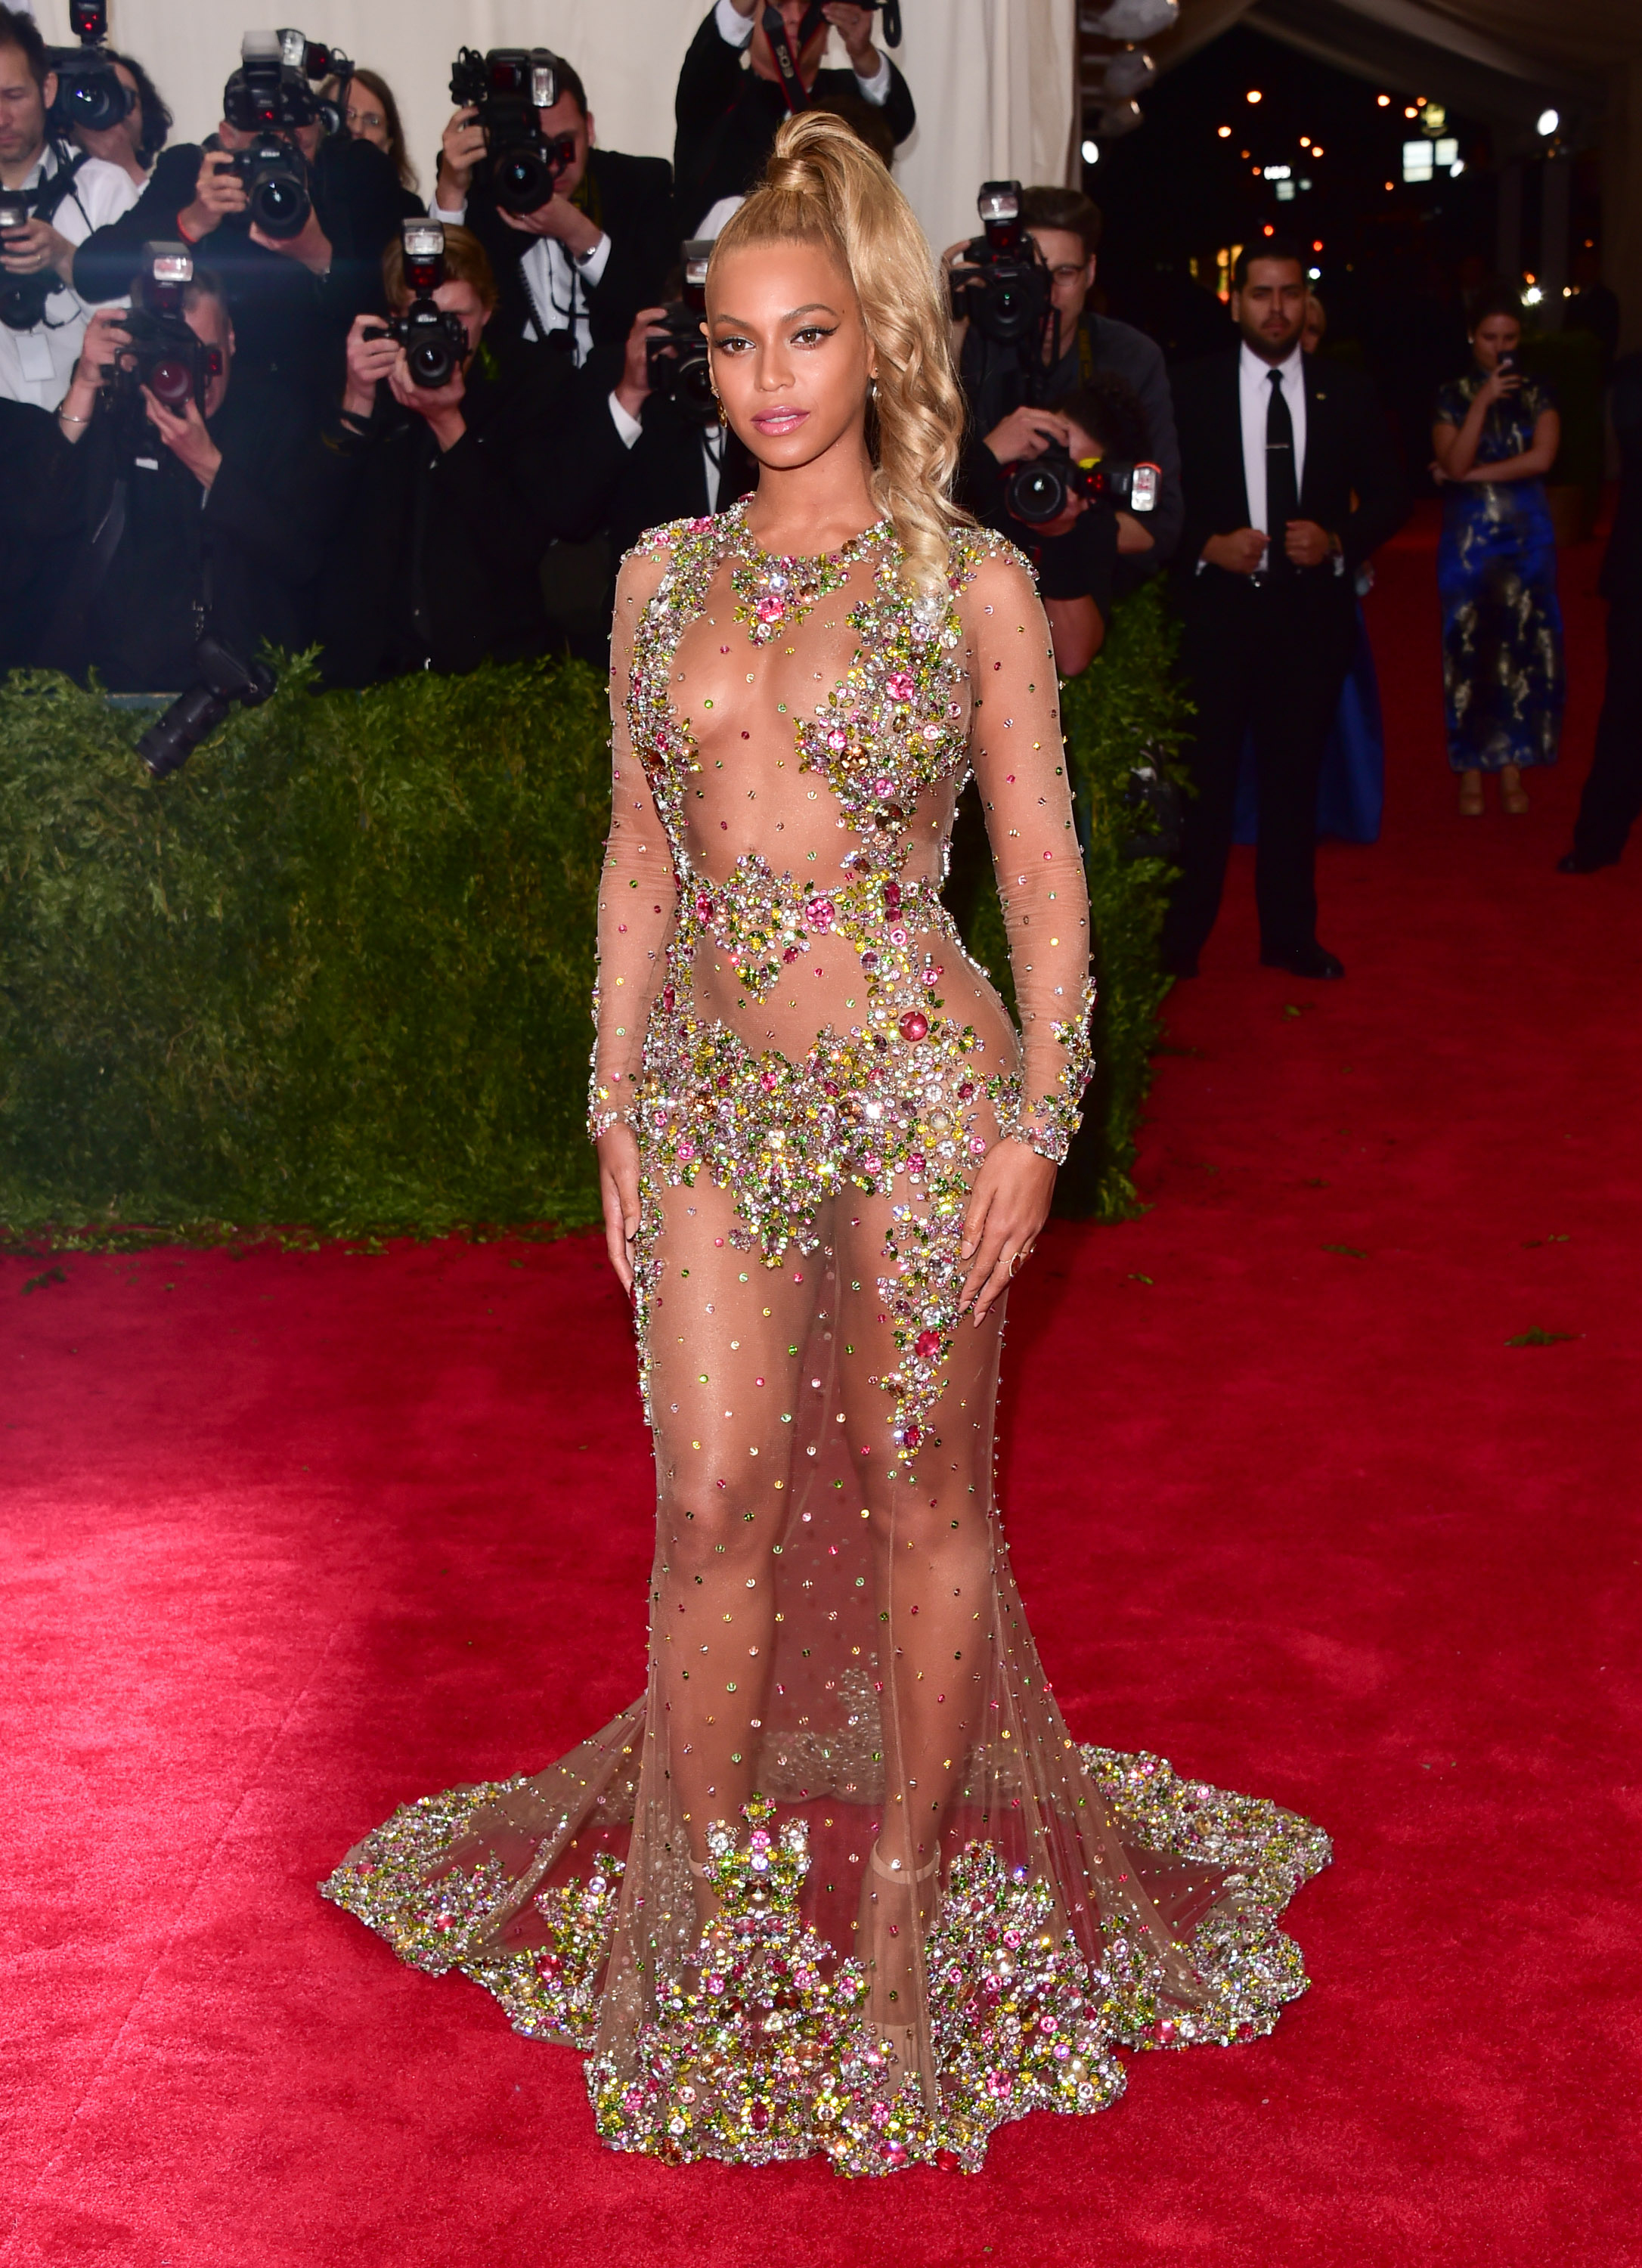 Met Gala: Beyonce's Sheer Givenchy Dress Turns Heads | Time